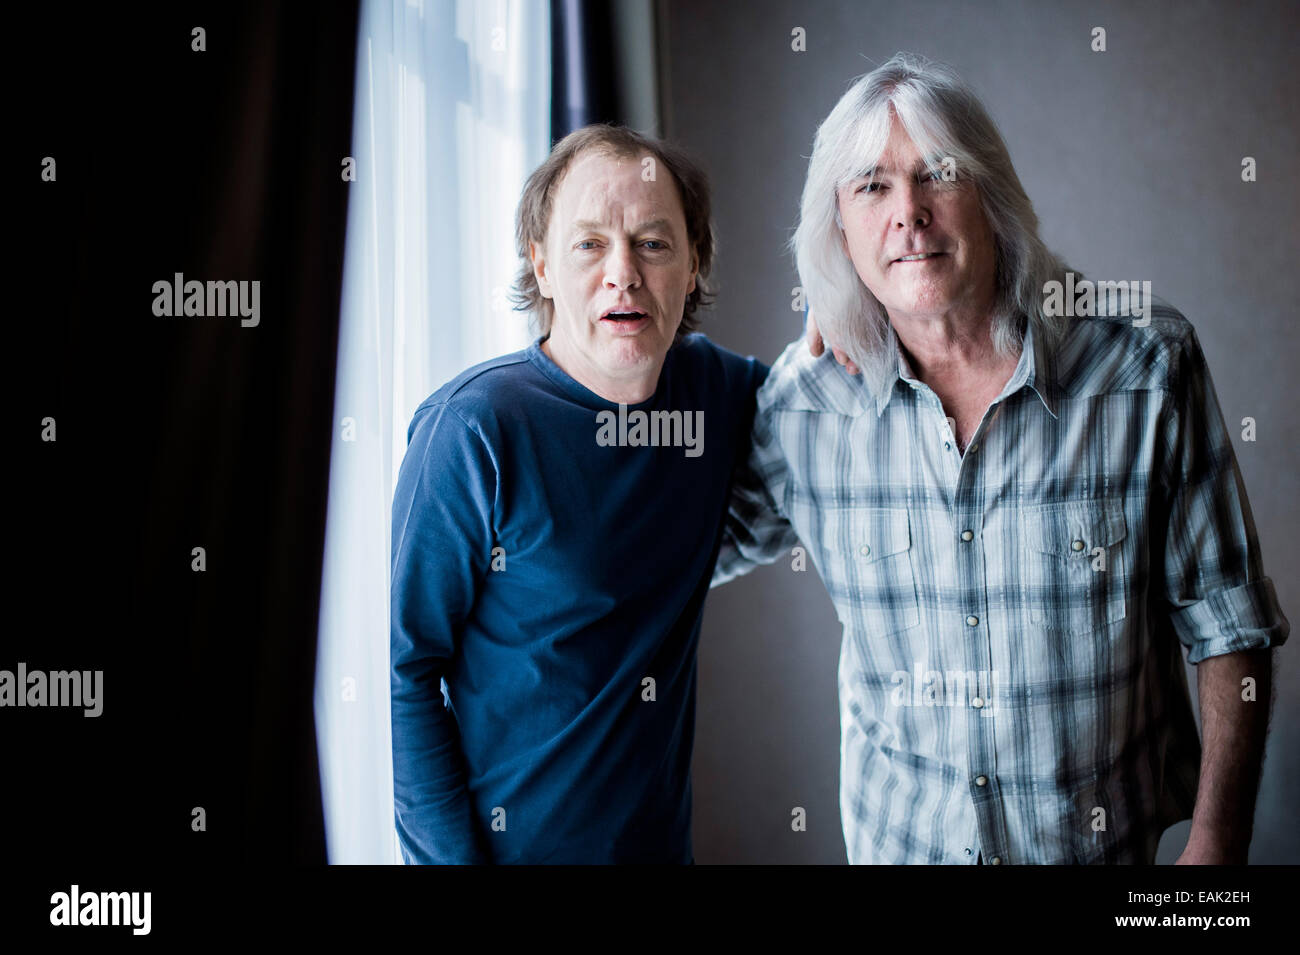 Musicians Cliff Williams (R) and Angus Young of Australian band AC/DC pose for photos during an interview in Duesseldorf, Germany, 06 November 2014. The band will release their now album on 28 November 2014. Photo: Marcus Simaitis/dpa Stock Photo